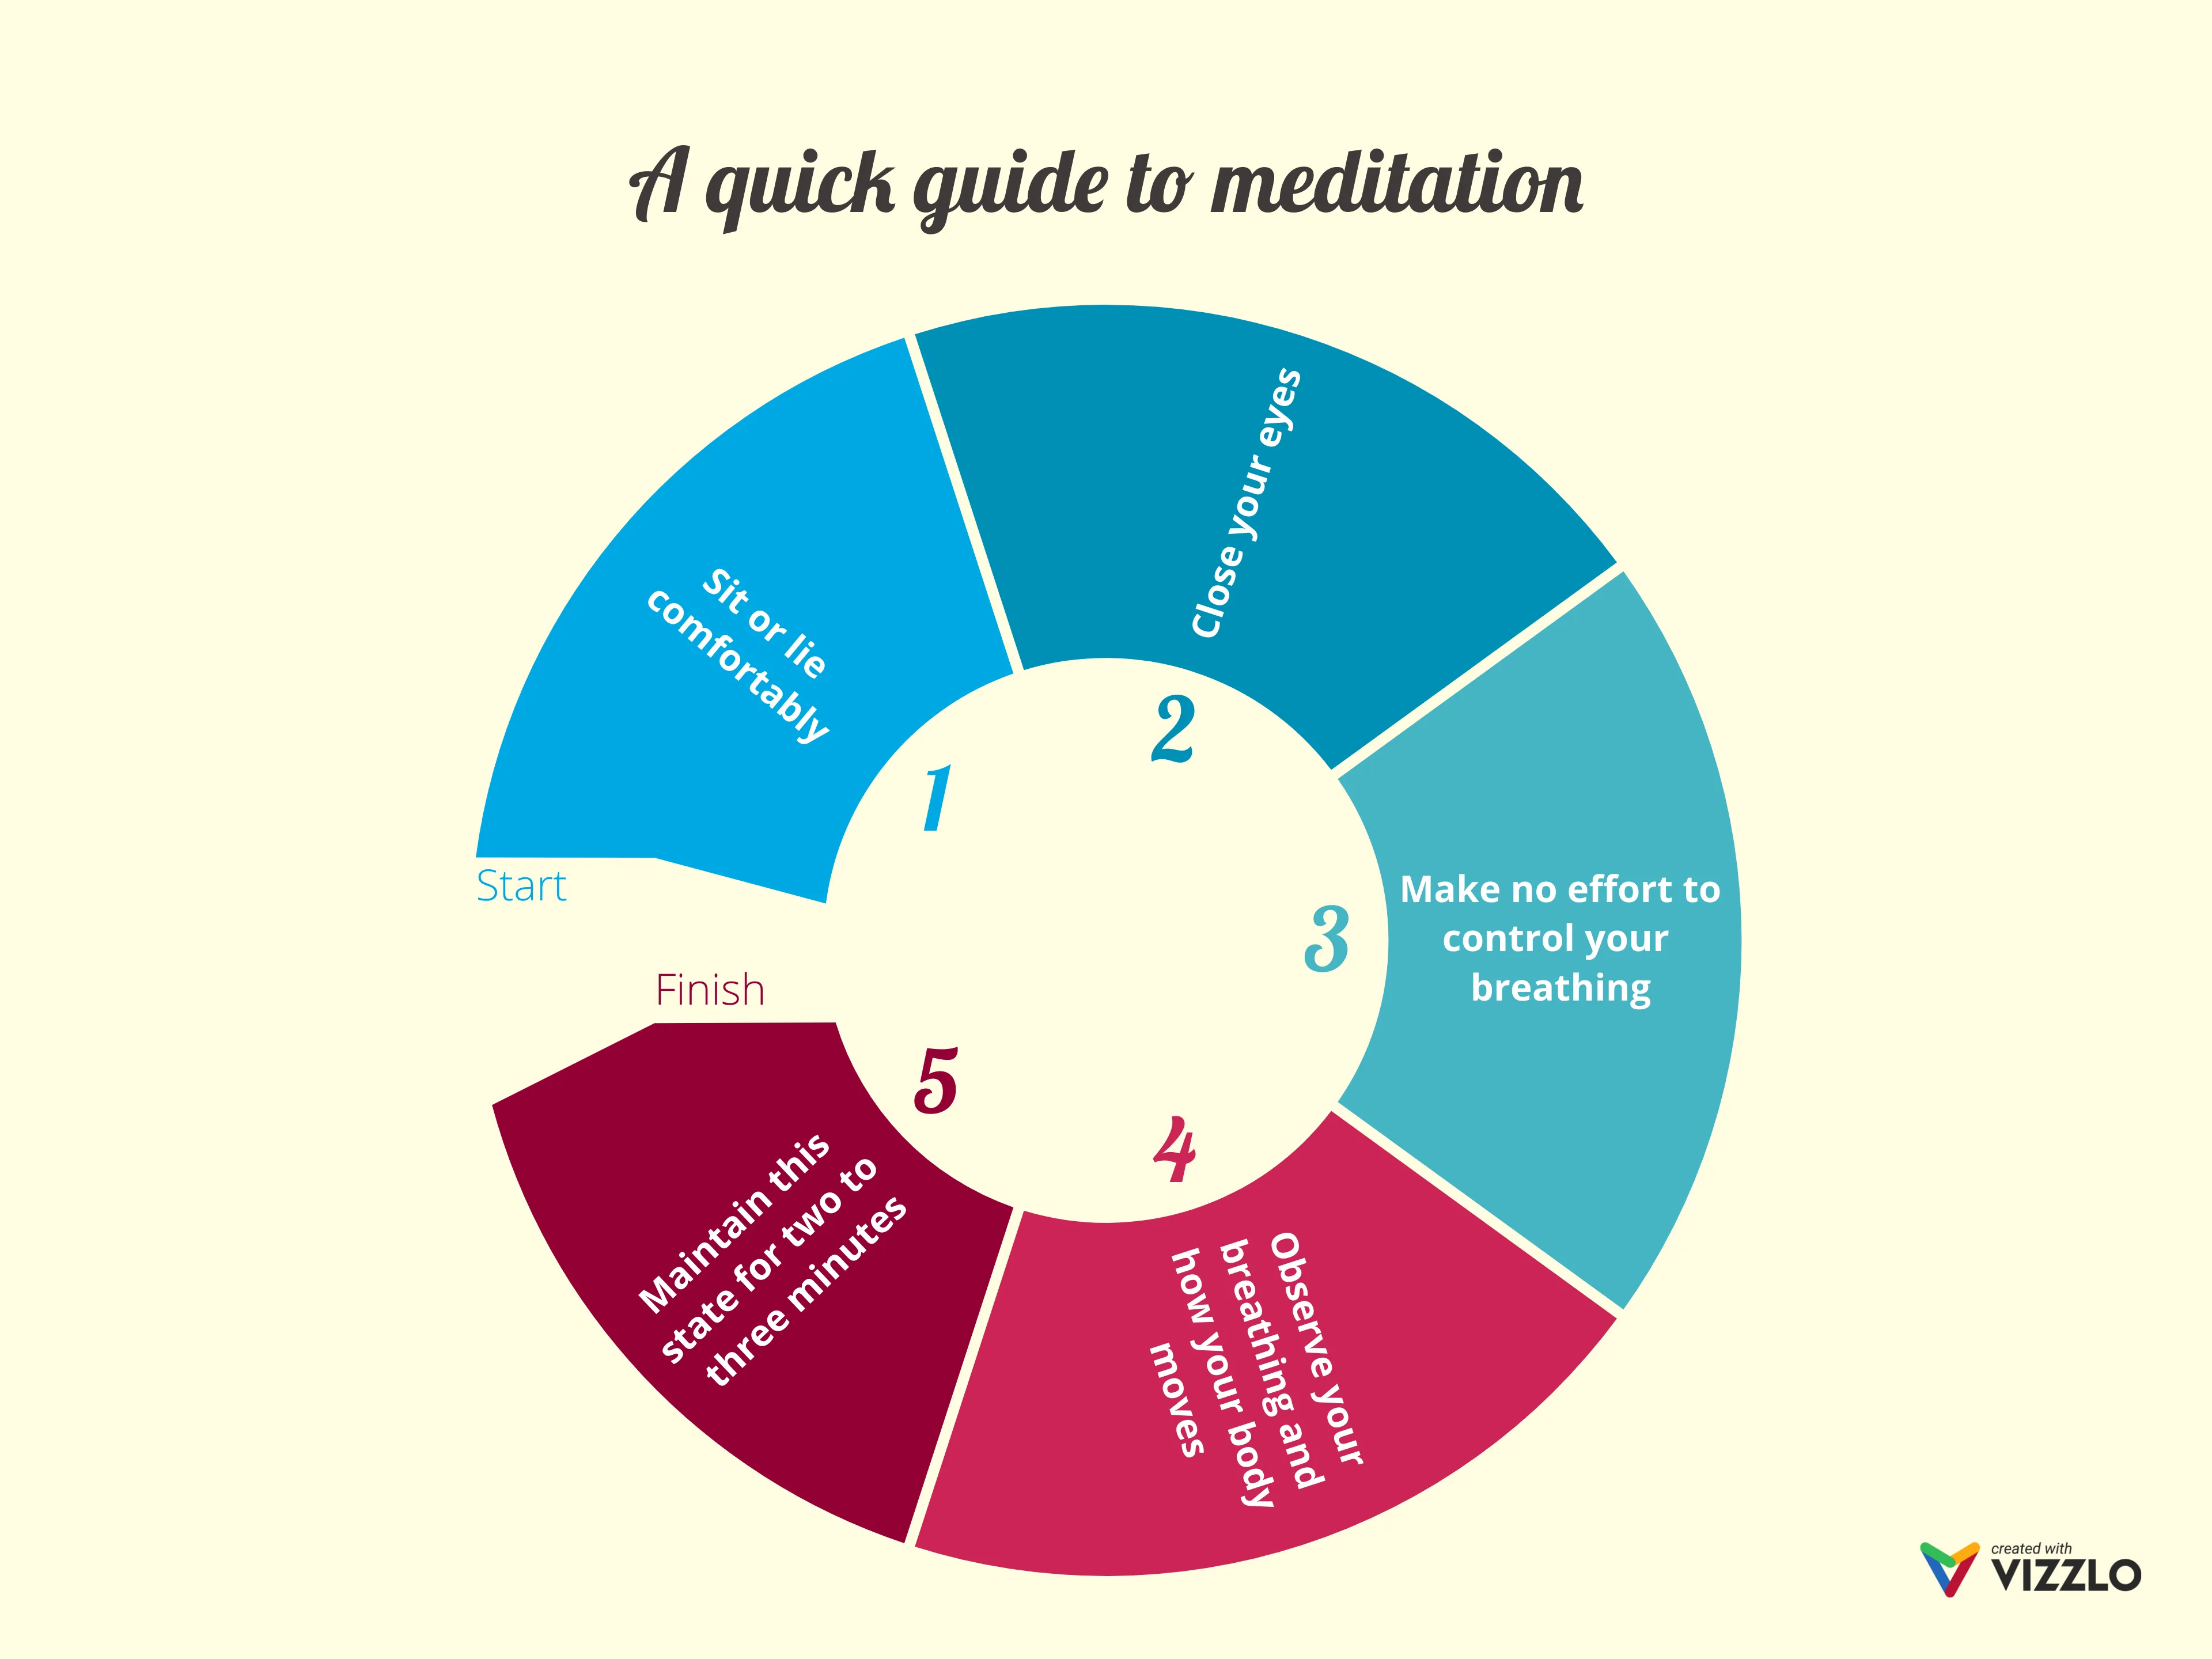 A quick guide to meditation